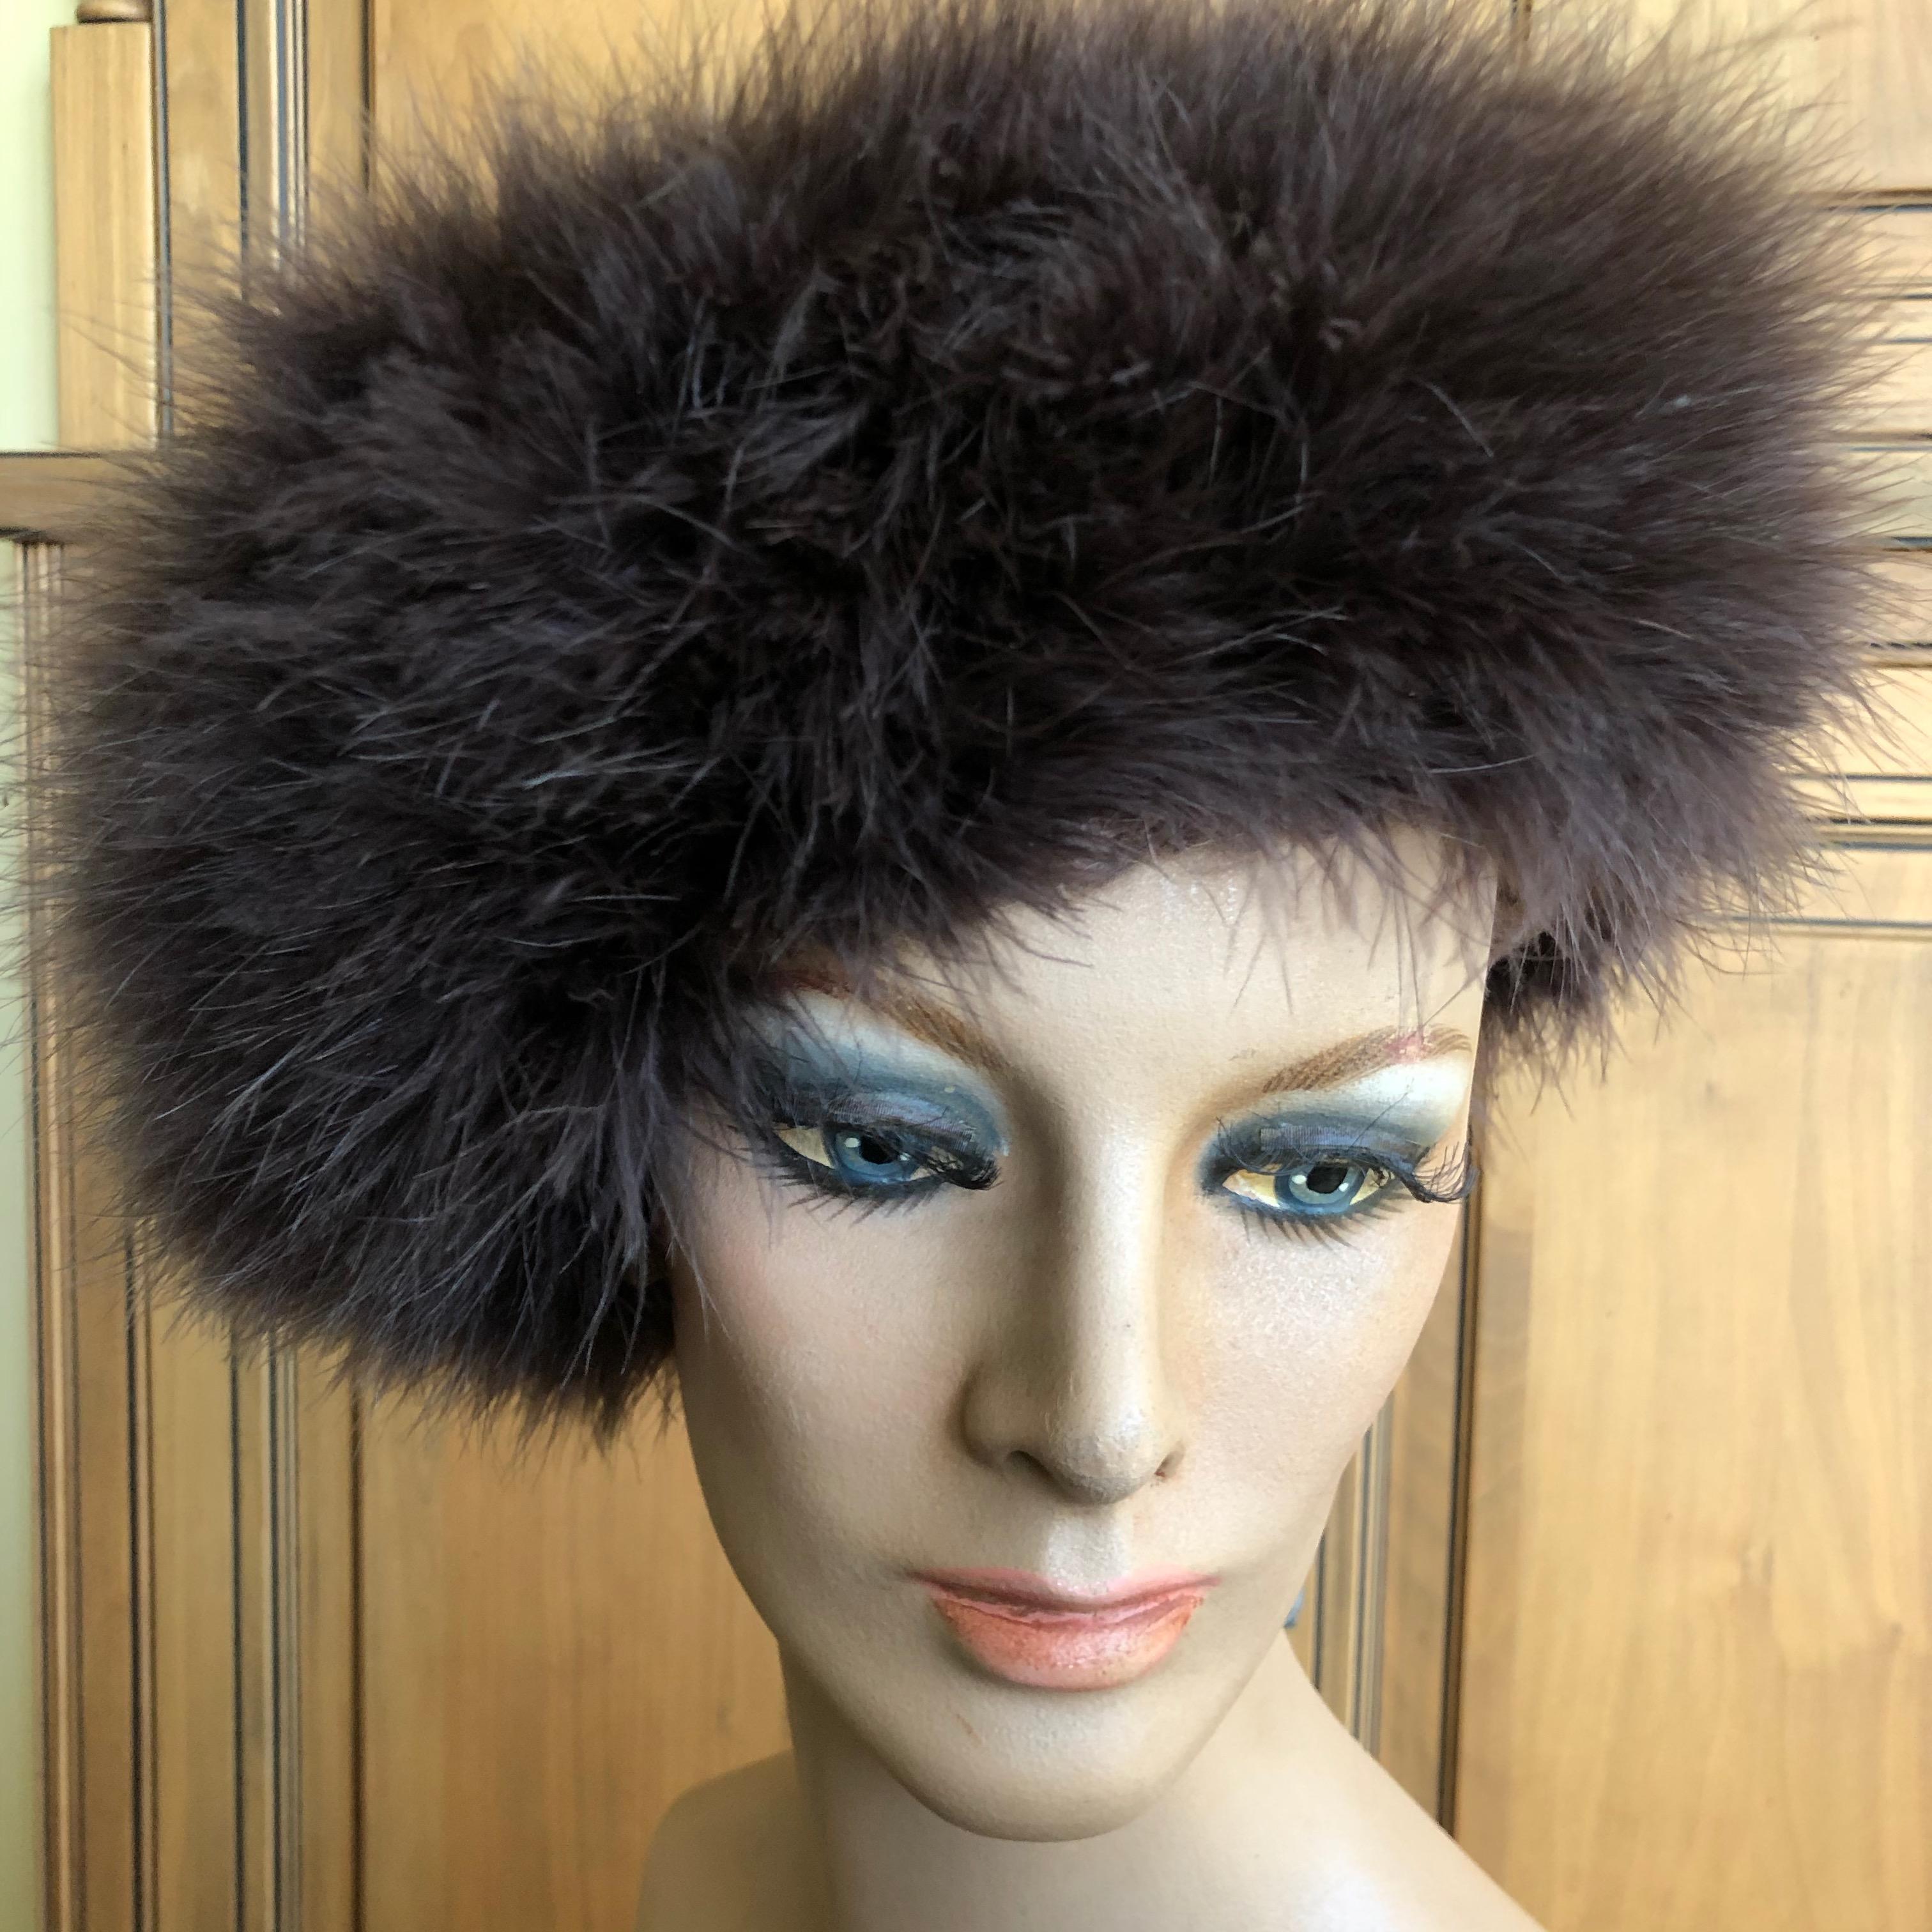 Marzi Firenze Black and White Straw Turban w Coq Feather Bow for Neiman Marcus
22.5 inch circumfrence.
In excellent condition